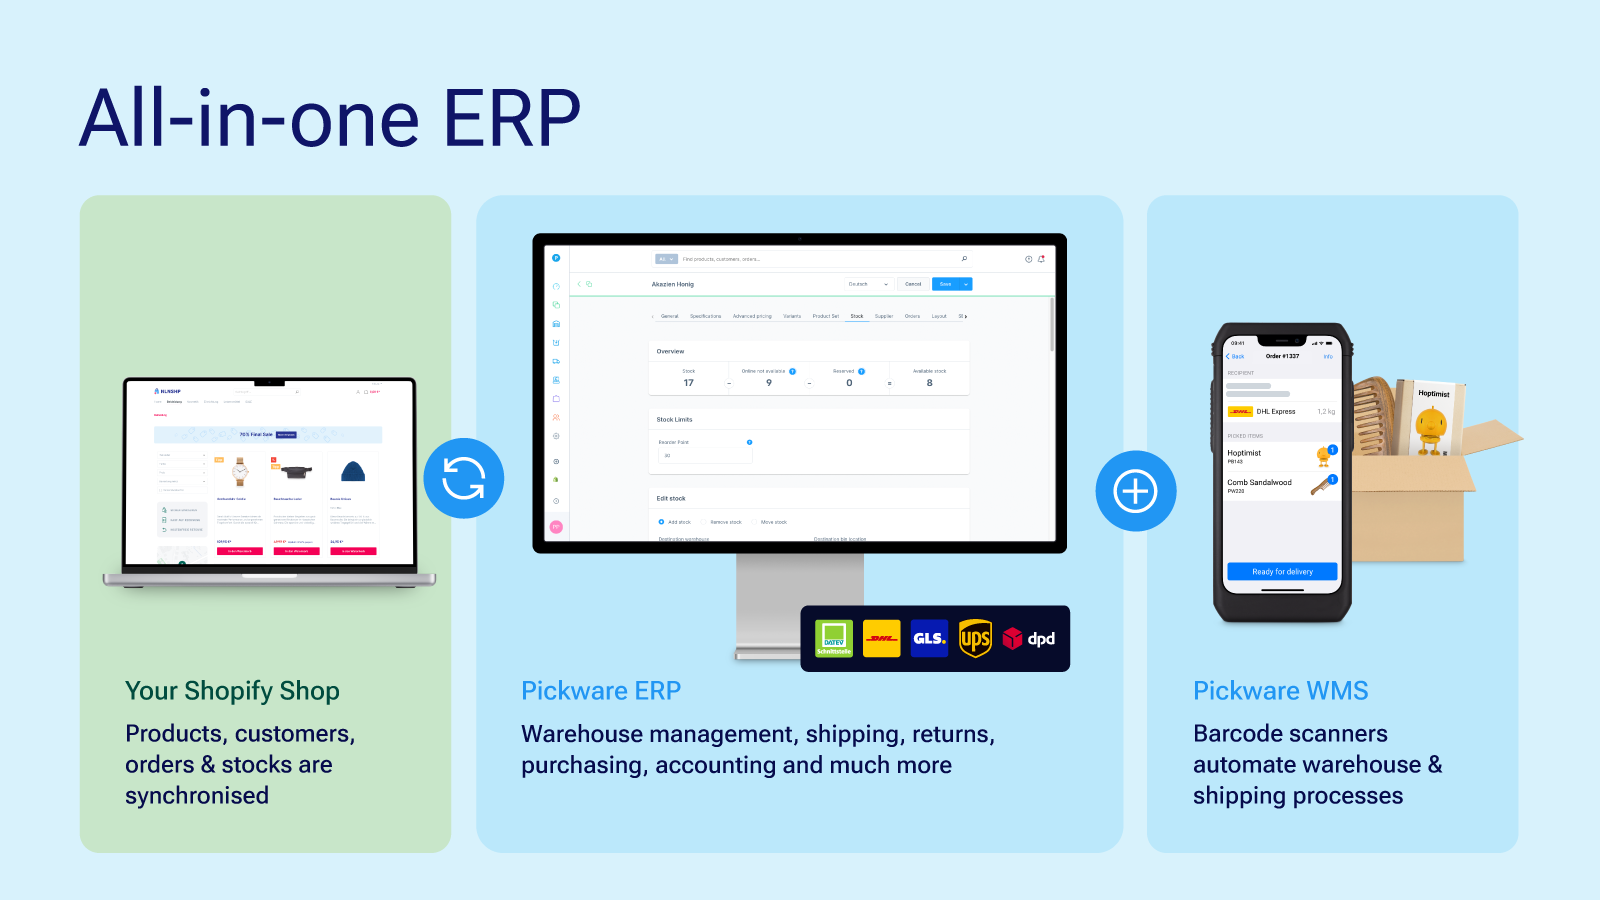 All-in-one ERP for warehouse, shipping, accounting and much more